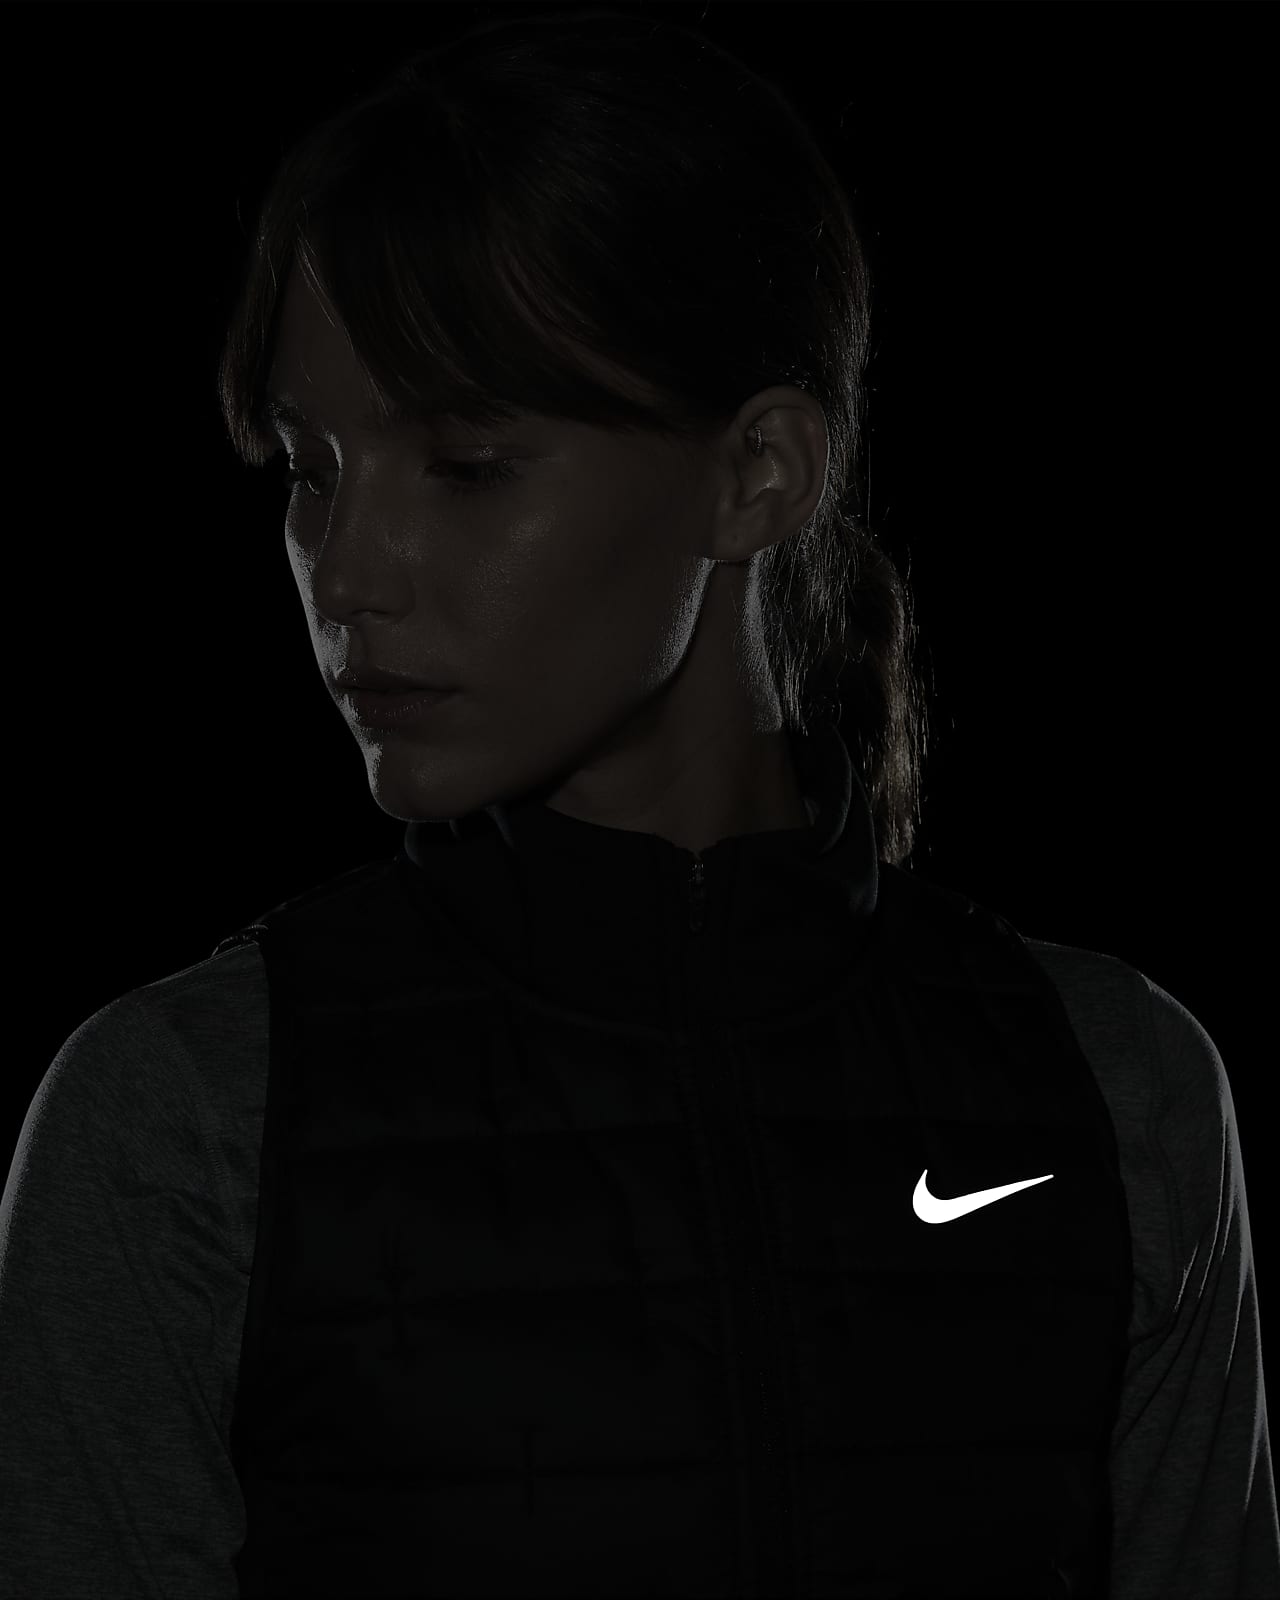 Nike Therma-FIT Synthetic Fill Running Vest - Women's